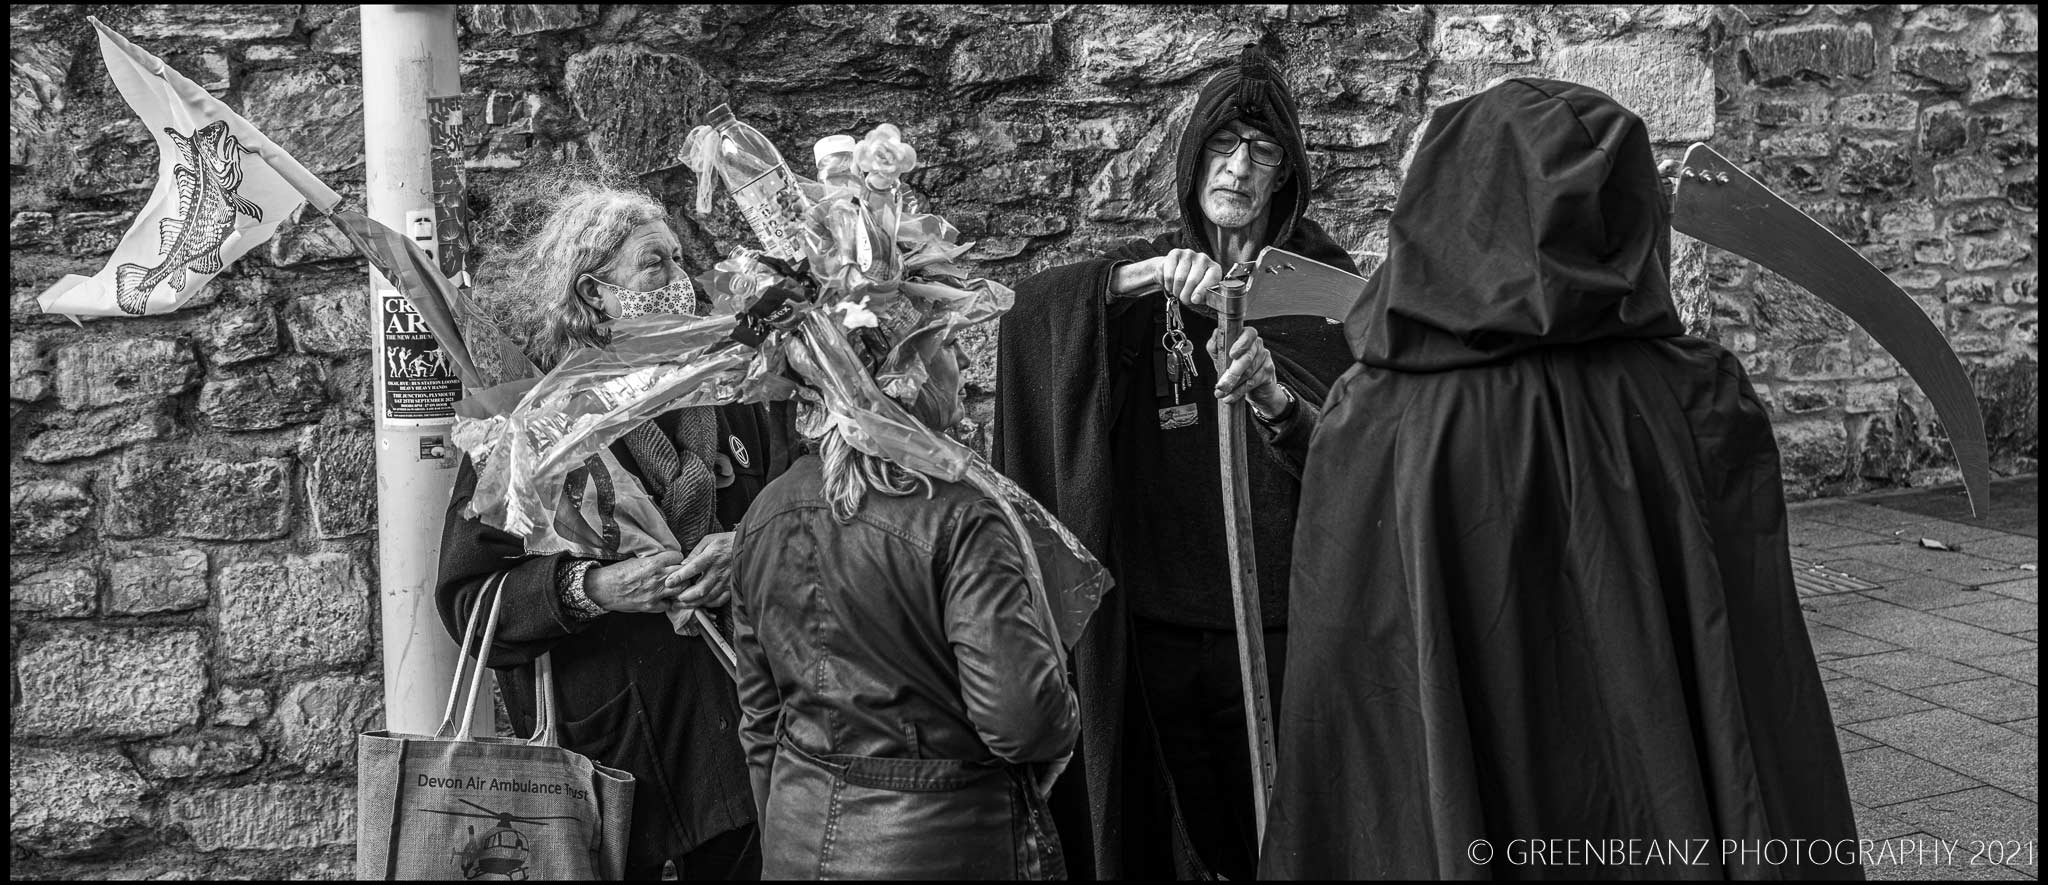 Death sharpens his blade with fellow protesters at Plymouth's Climate Awareness March in 2021